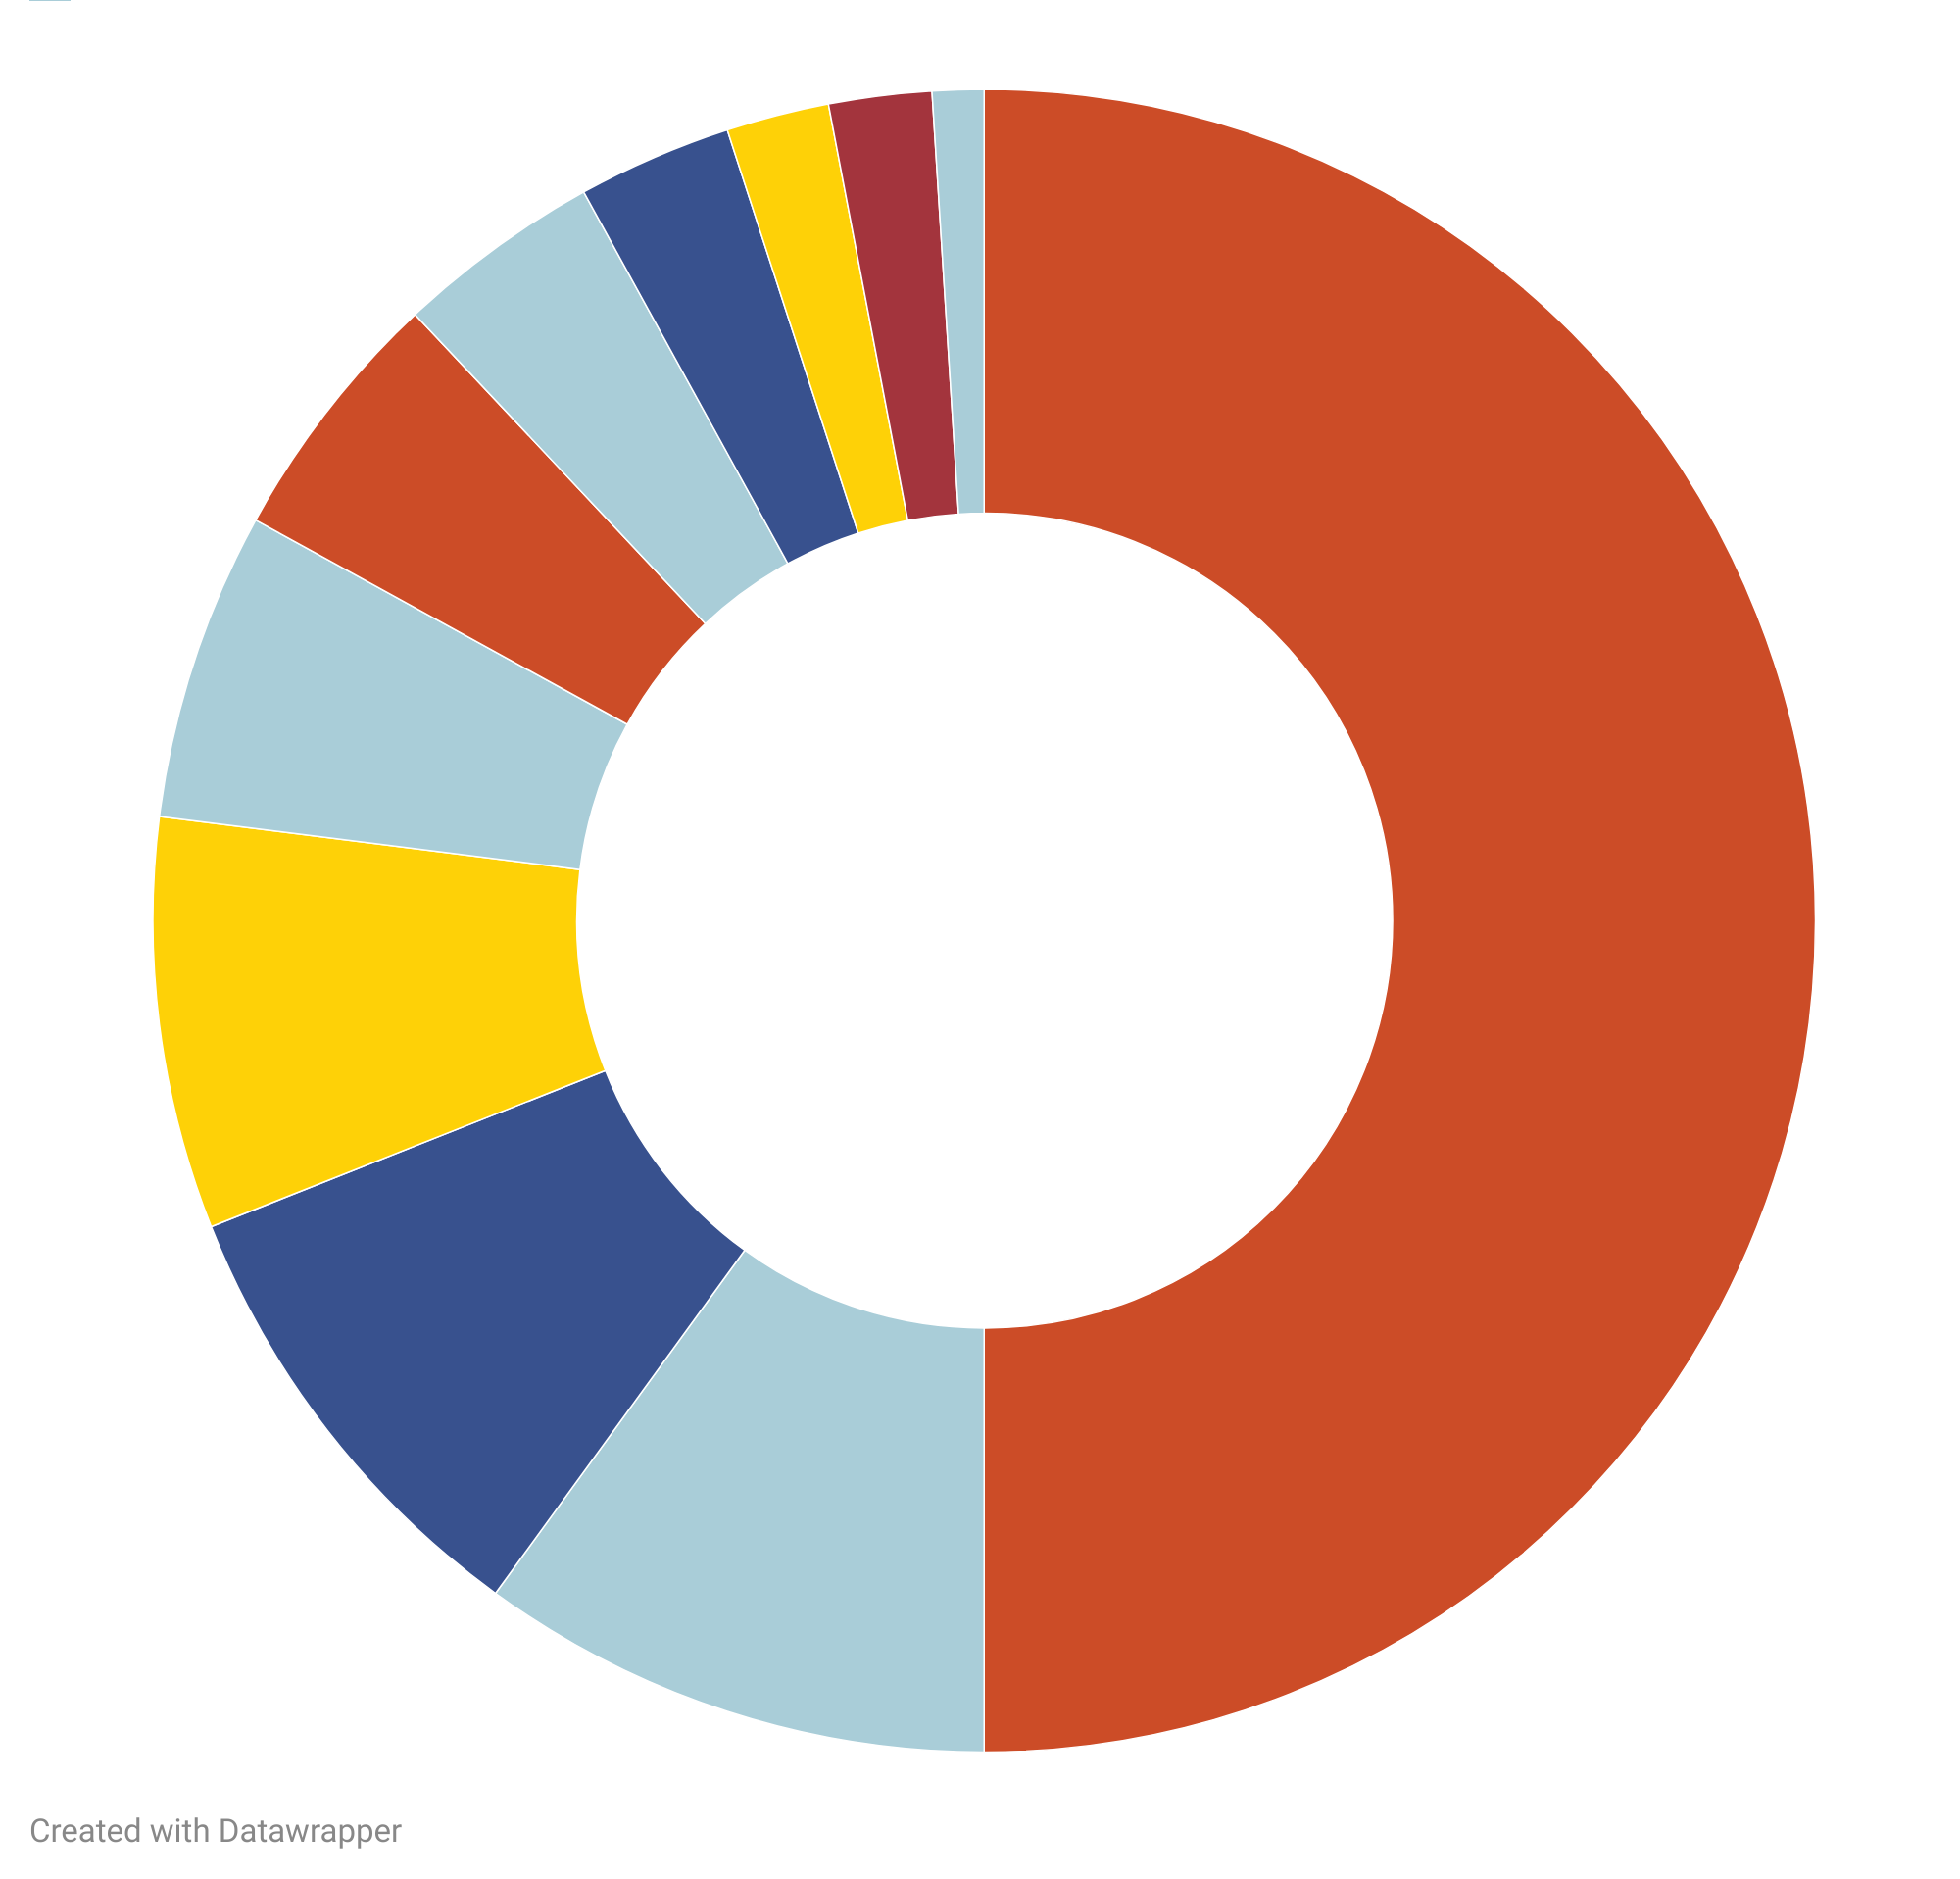 Unlabeled image of a pie chart